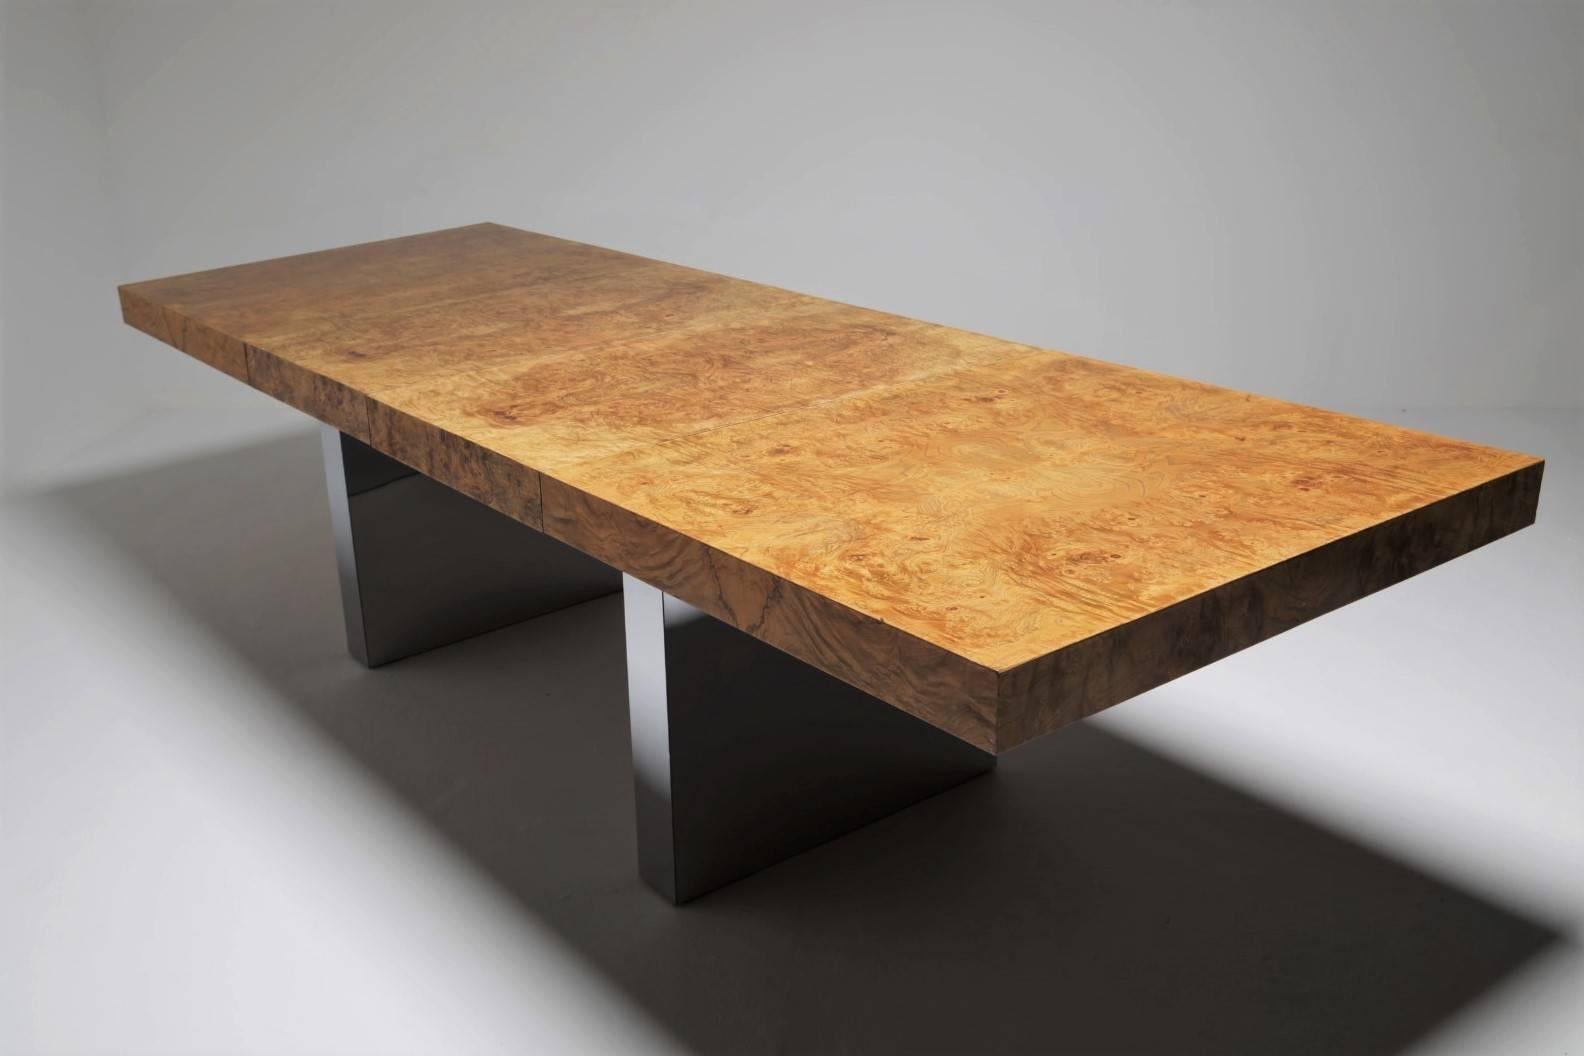 This is a wonderfully dramatic burl dining table by Milo Baughman for Thayer Coggin. The burl wood top has beautiful grain and a gorgeous warmth to it. There is a Dual pedestal polished chrome base that really reflects the light yet belies the